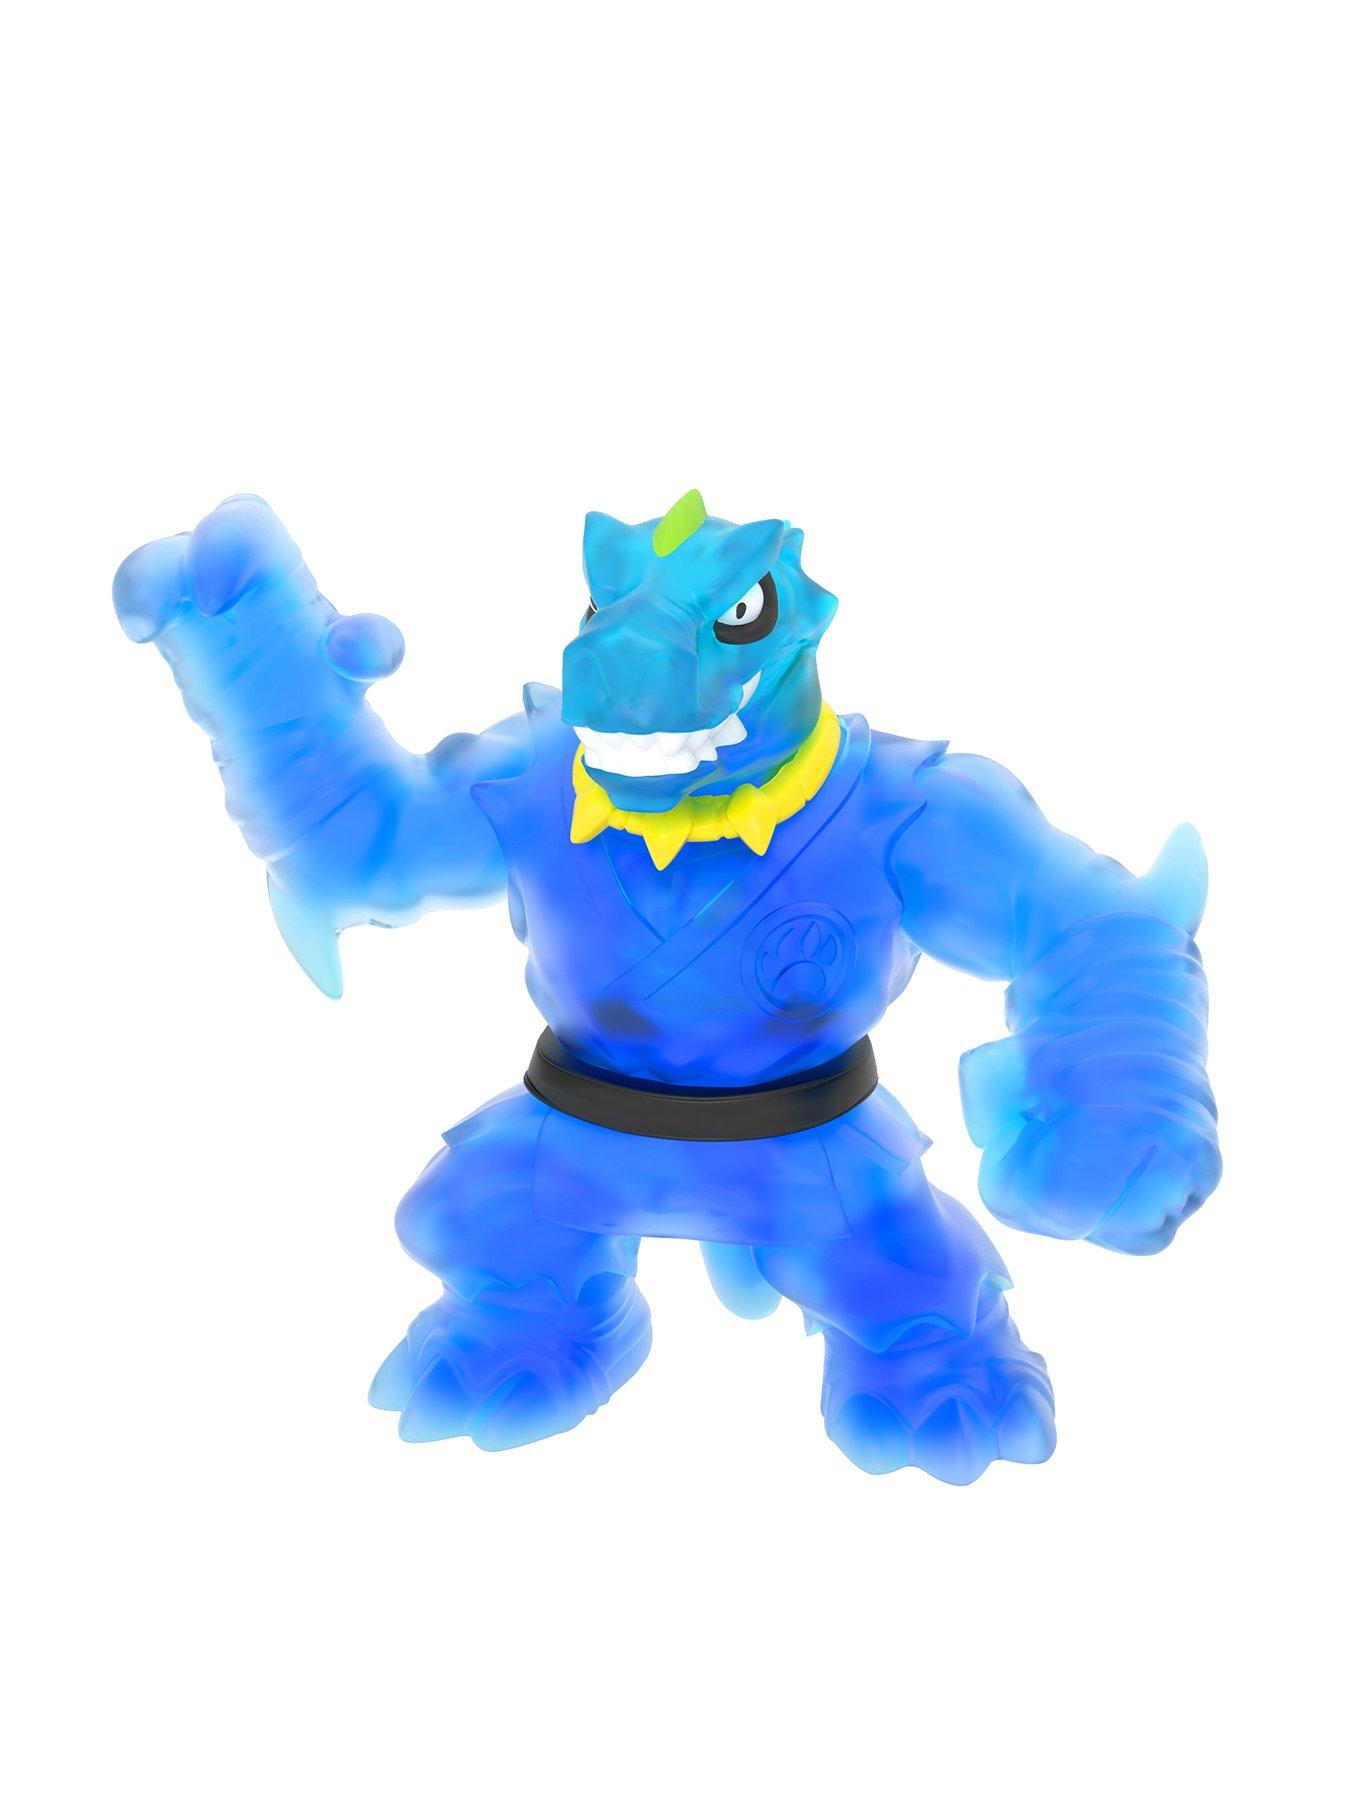 Heroes Of Goo Jit Zu Glow Shifters Hero, Super Gooey Tyro Hero Goo Filled  Toy with a unique Glowing Goo Transformation. Crush the core and see the Goo  Glow in the Dark!